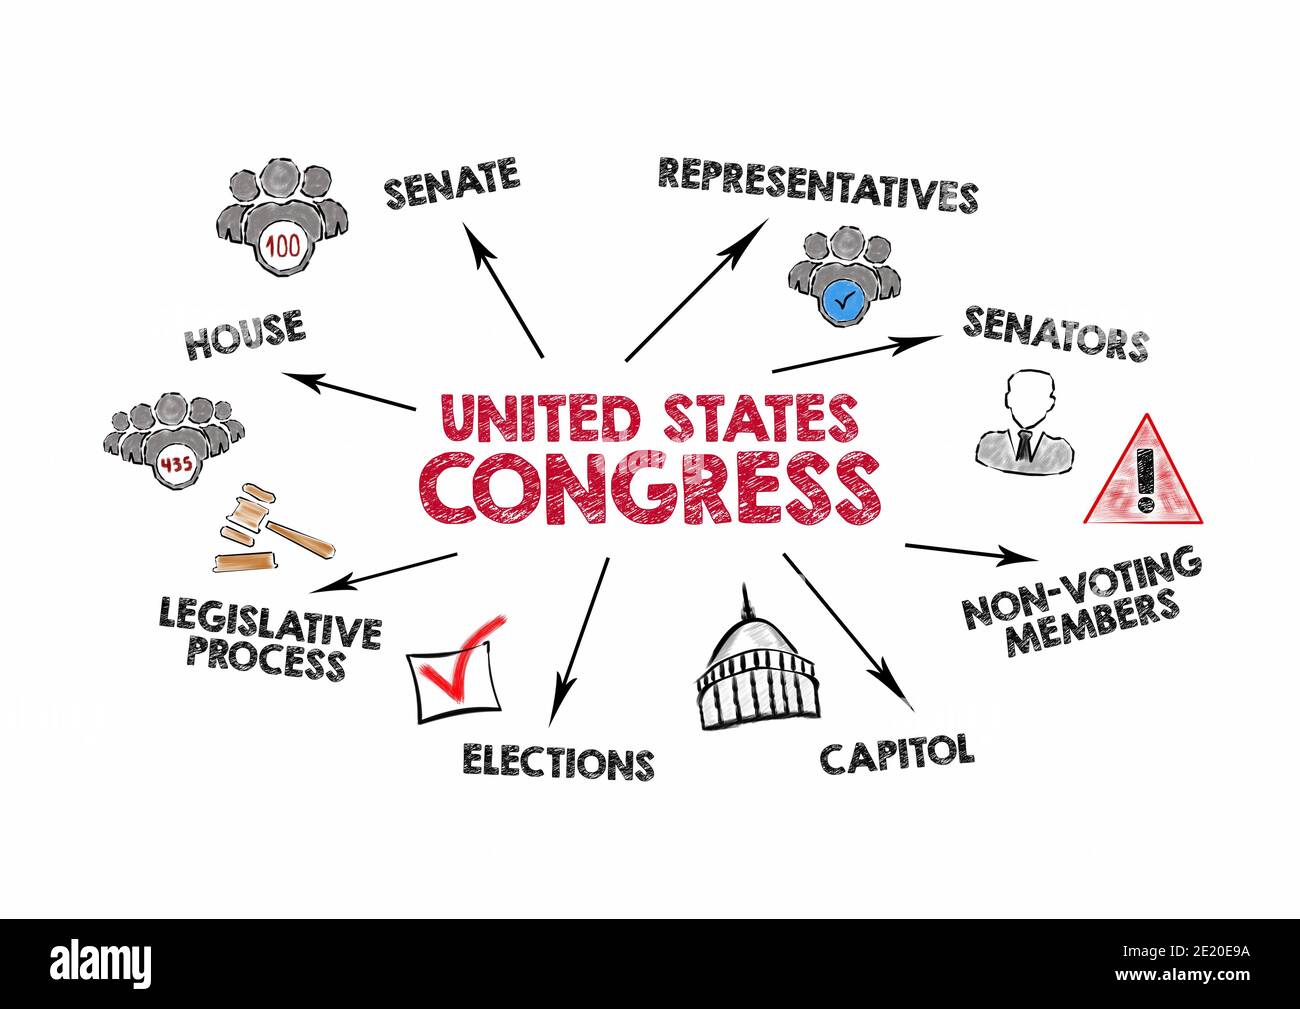 United States Congress. Senate, Capitol, Elections and Legislative Process concept. Chart with keywords and icons on white background Stock Photo